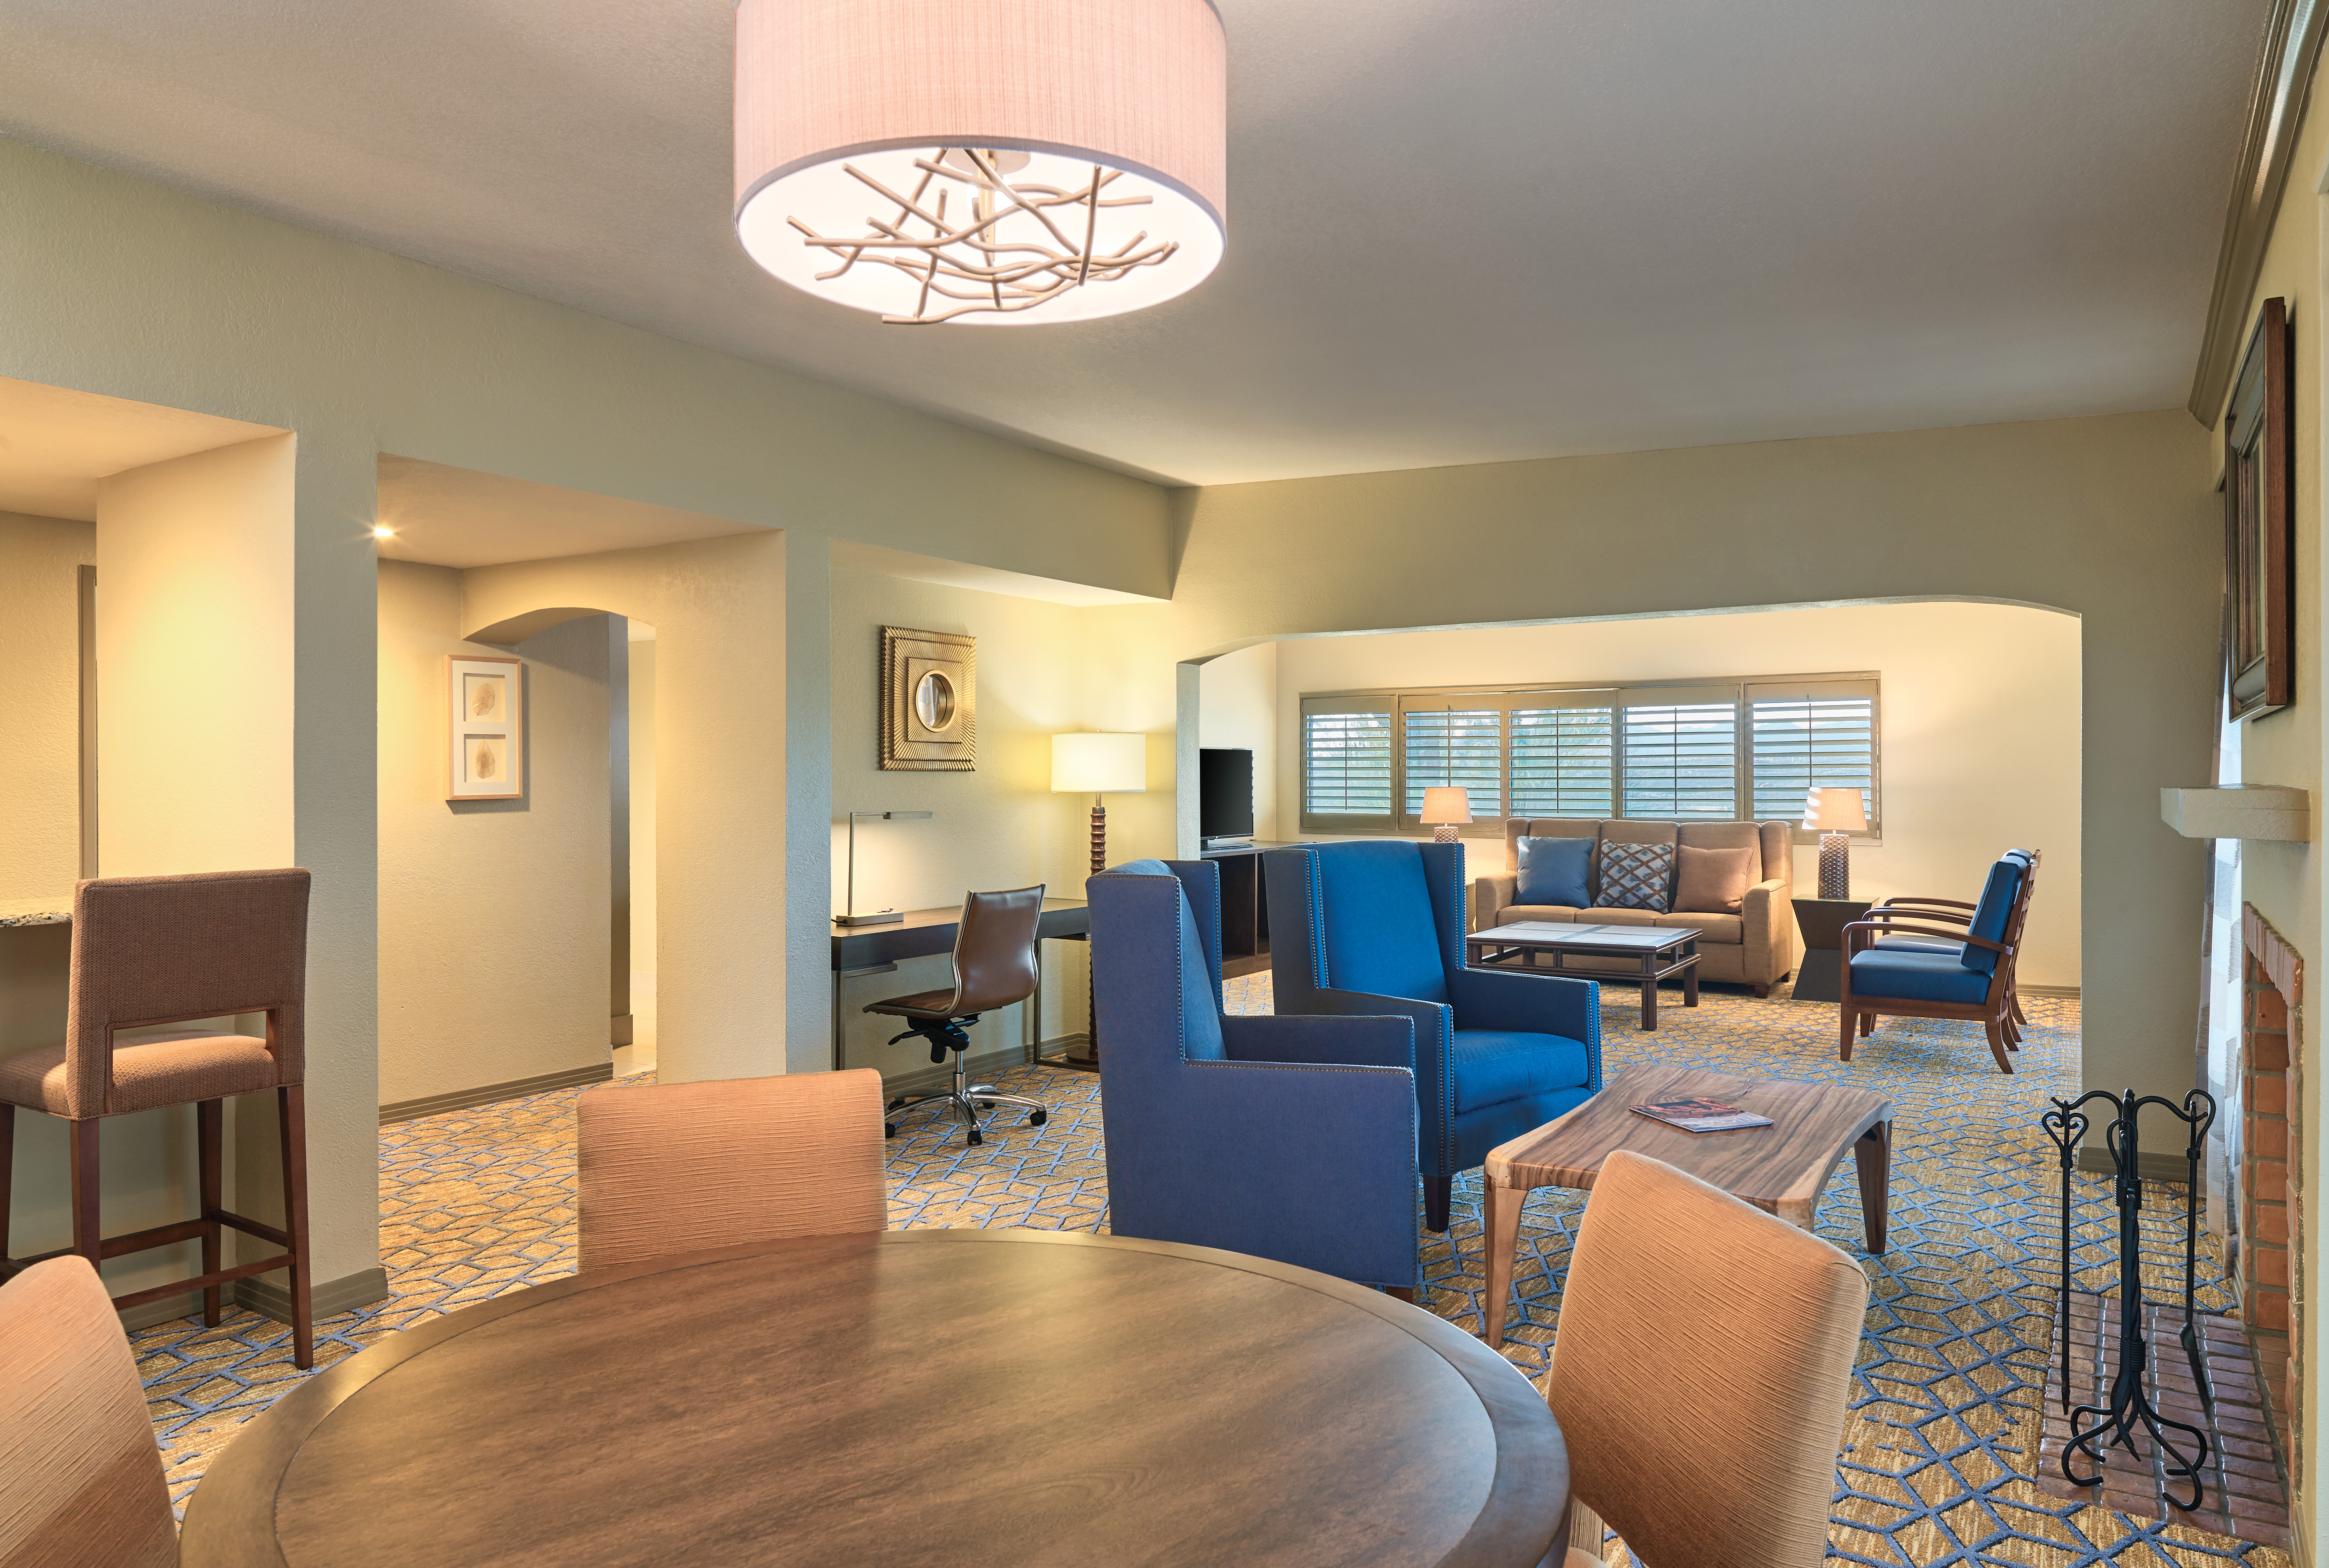 Hospitality Suite Living Area with  Round Table, Chairs, Fireplace, Soft Seating, Sofa and Work Desk